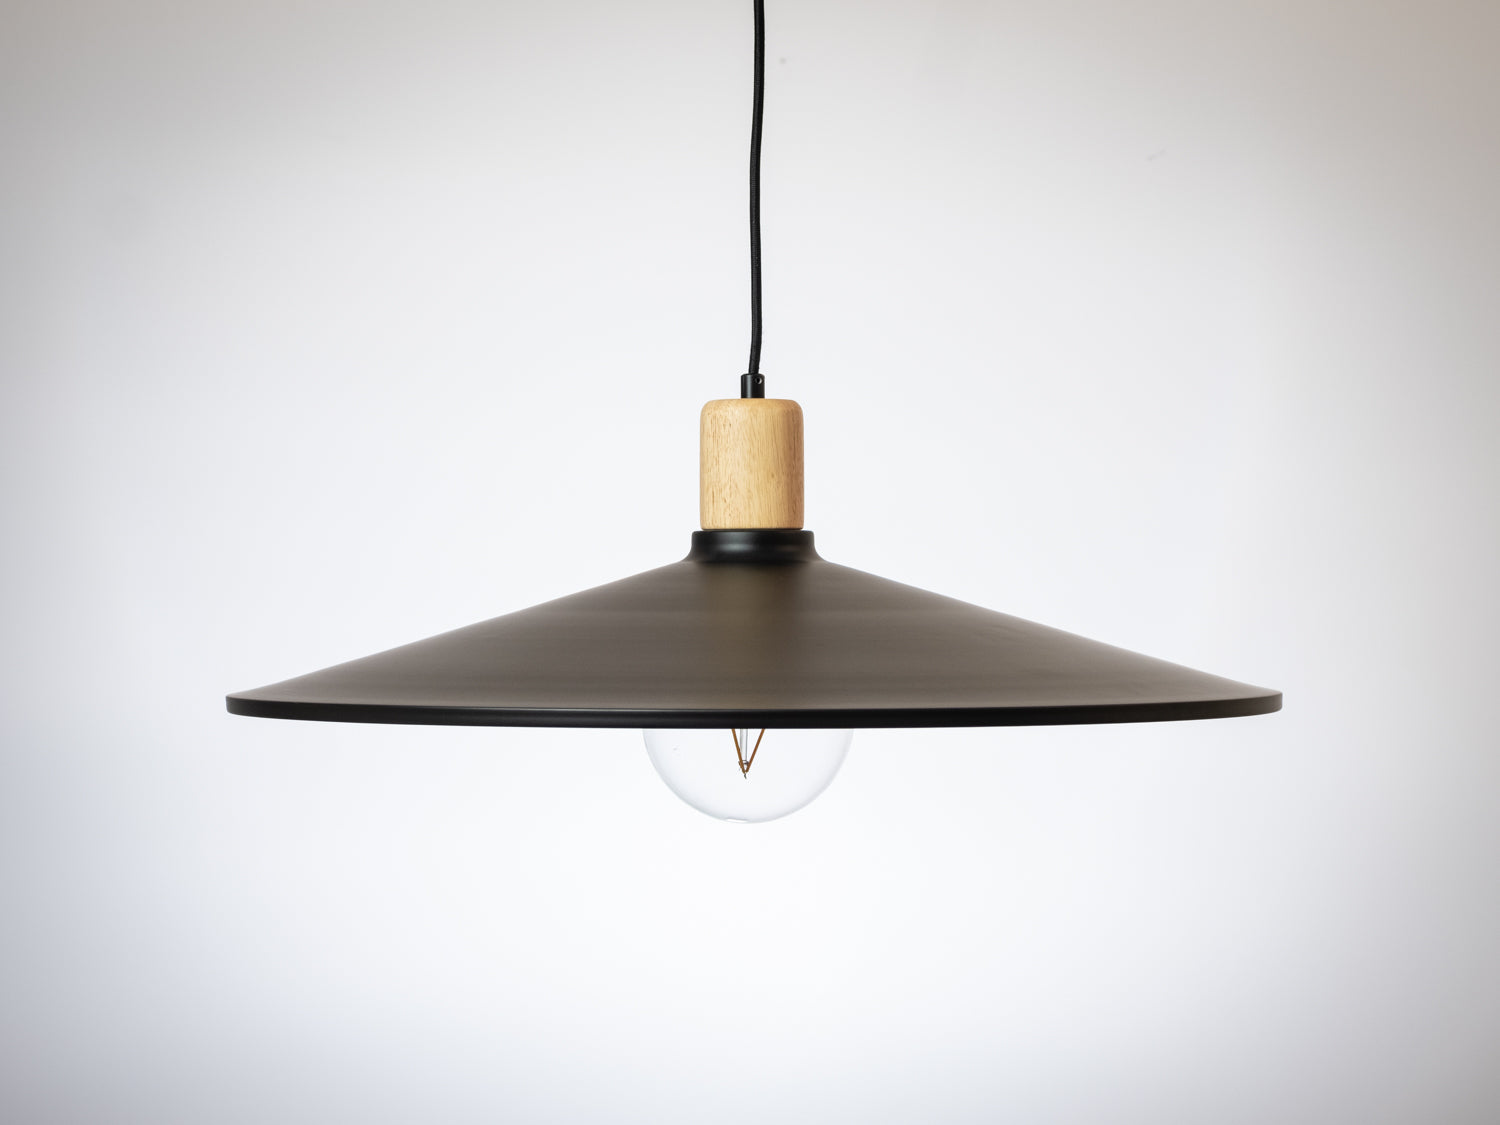 60cm Metal Pendant with Wooden Lamp Holder - img60a46894e917d